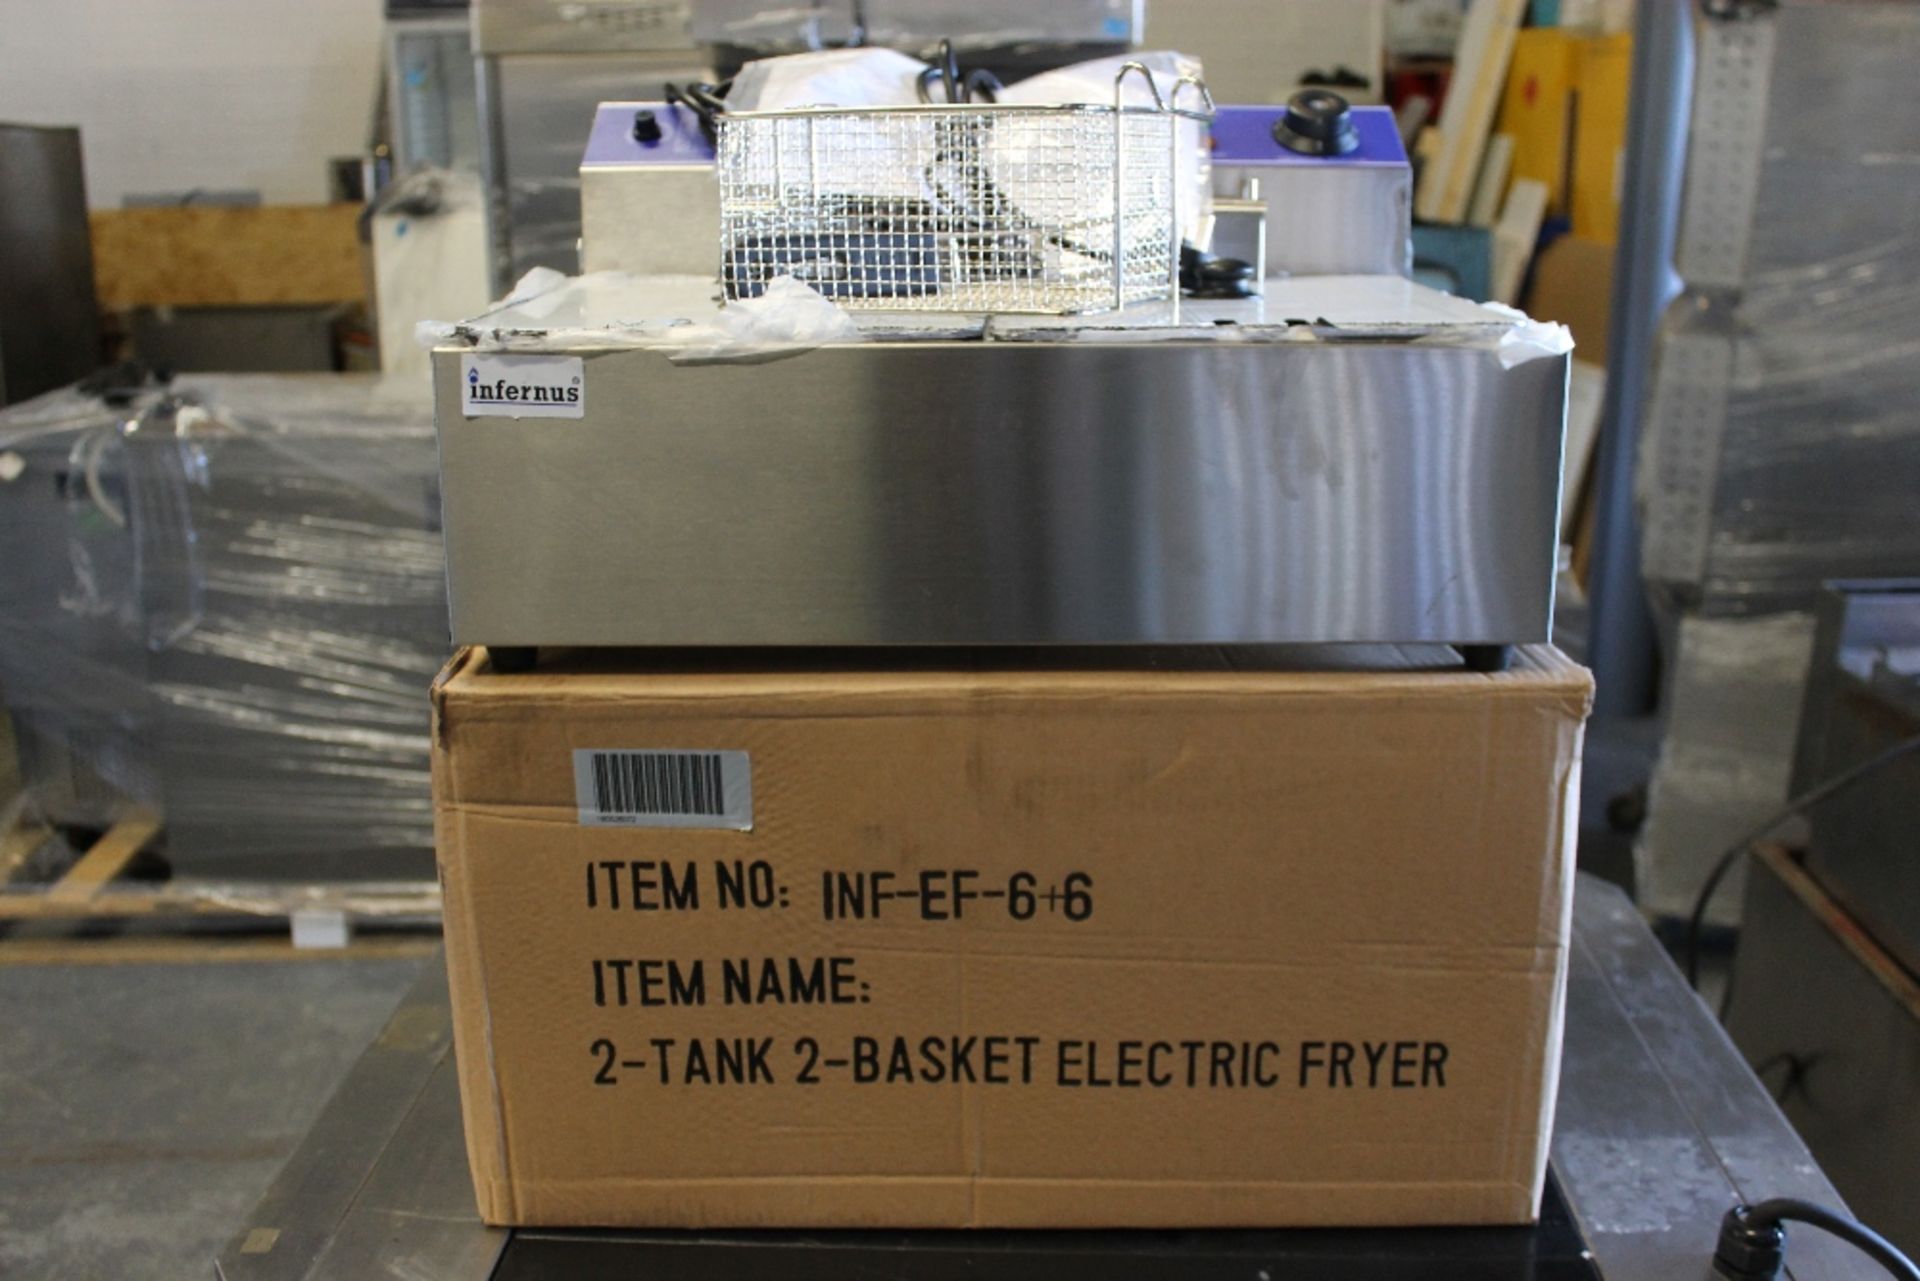 Infernus Twin Tank Double Basket New & Boxed Electric Fryer 1ph   Model INF-EF-6+6 - Image 2 of 3